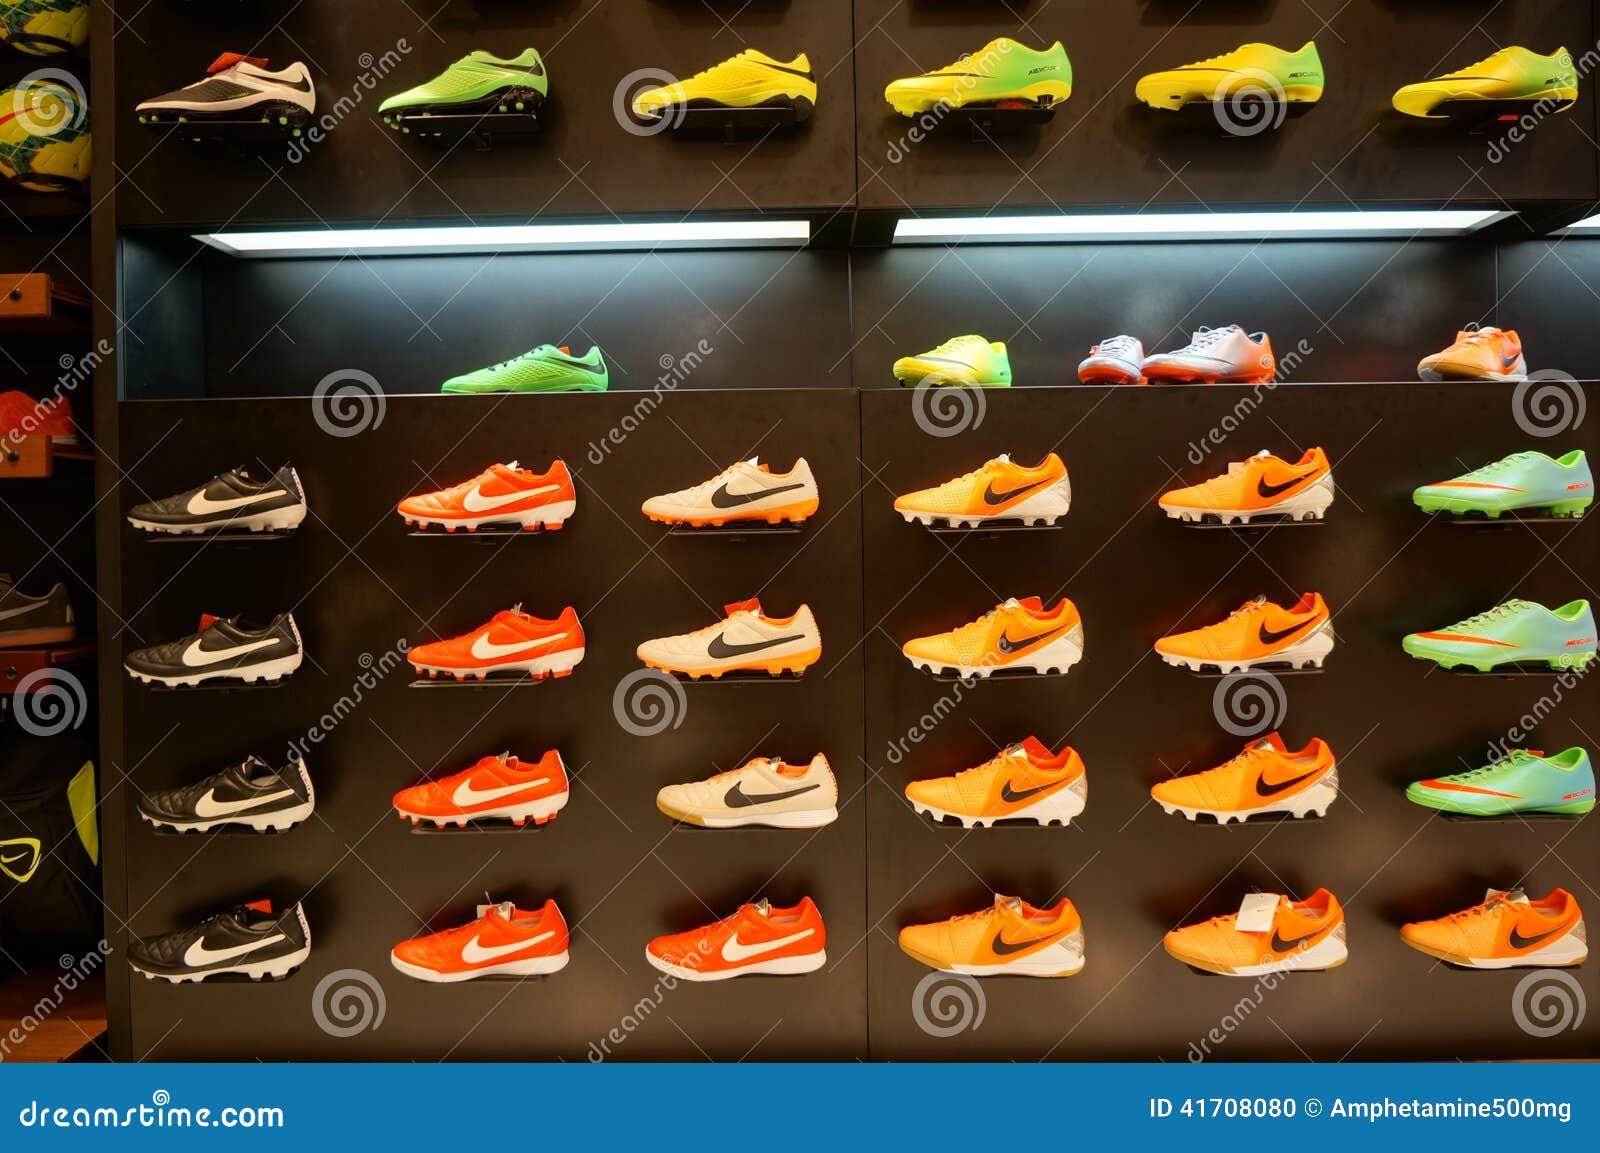 Sports shoes editorial image. Image of 